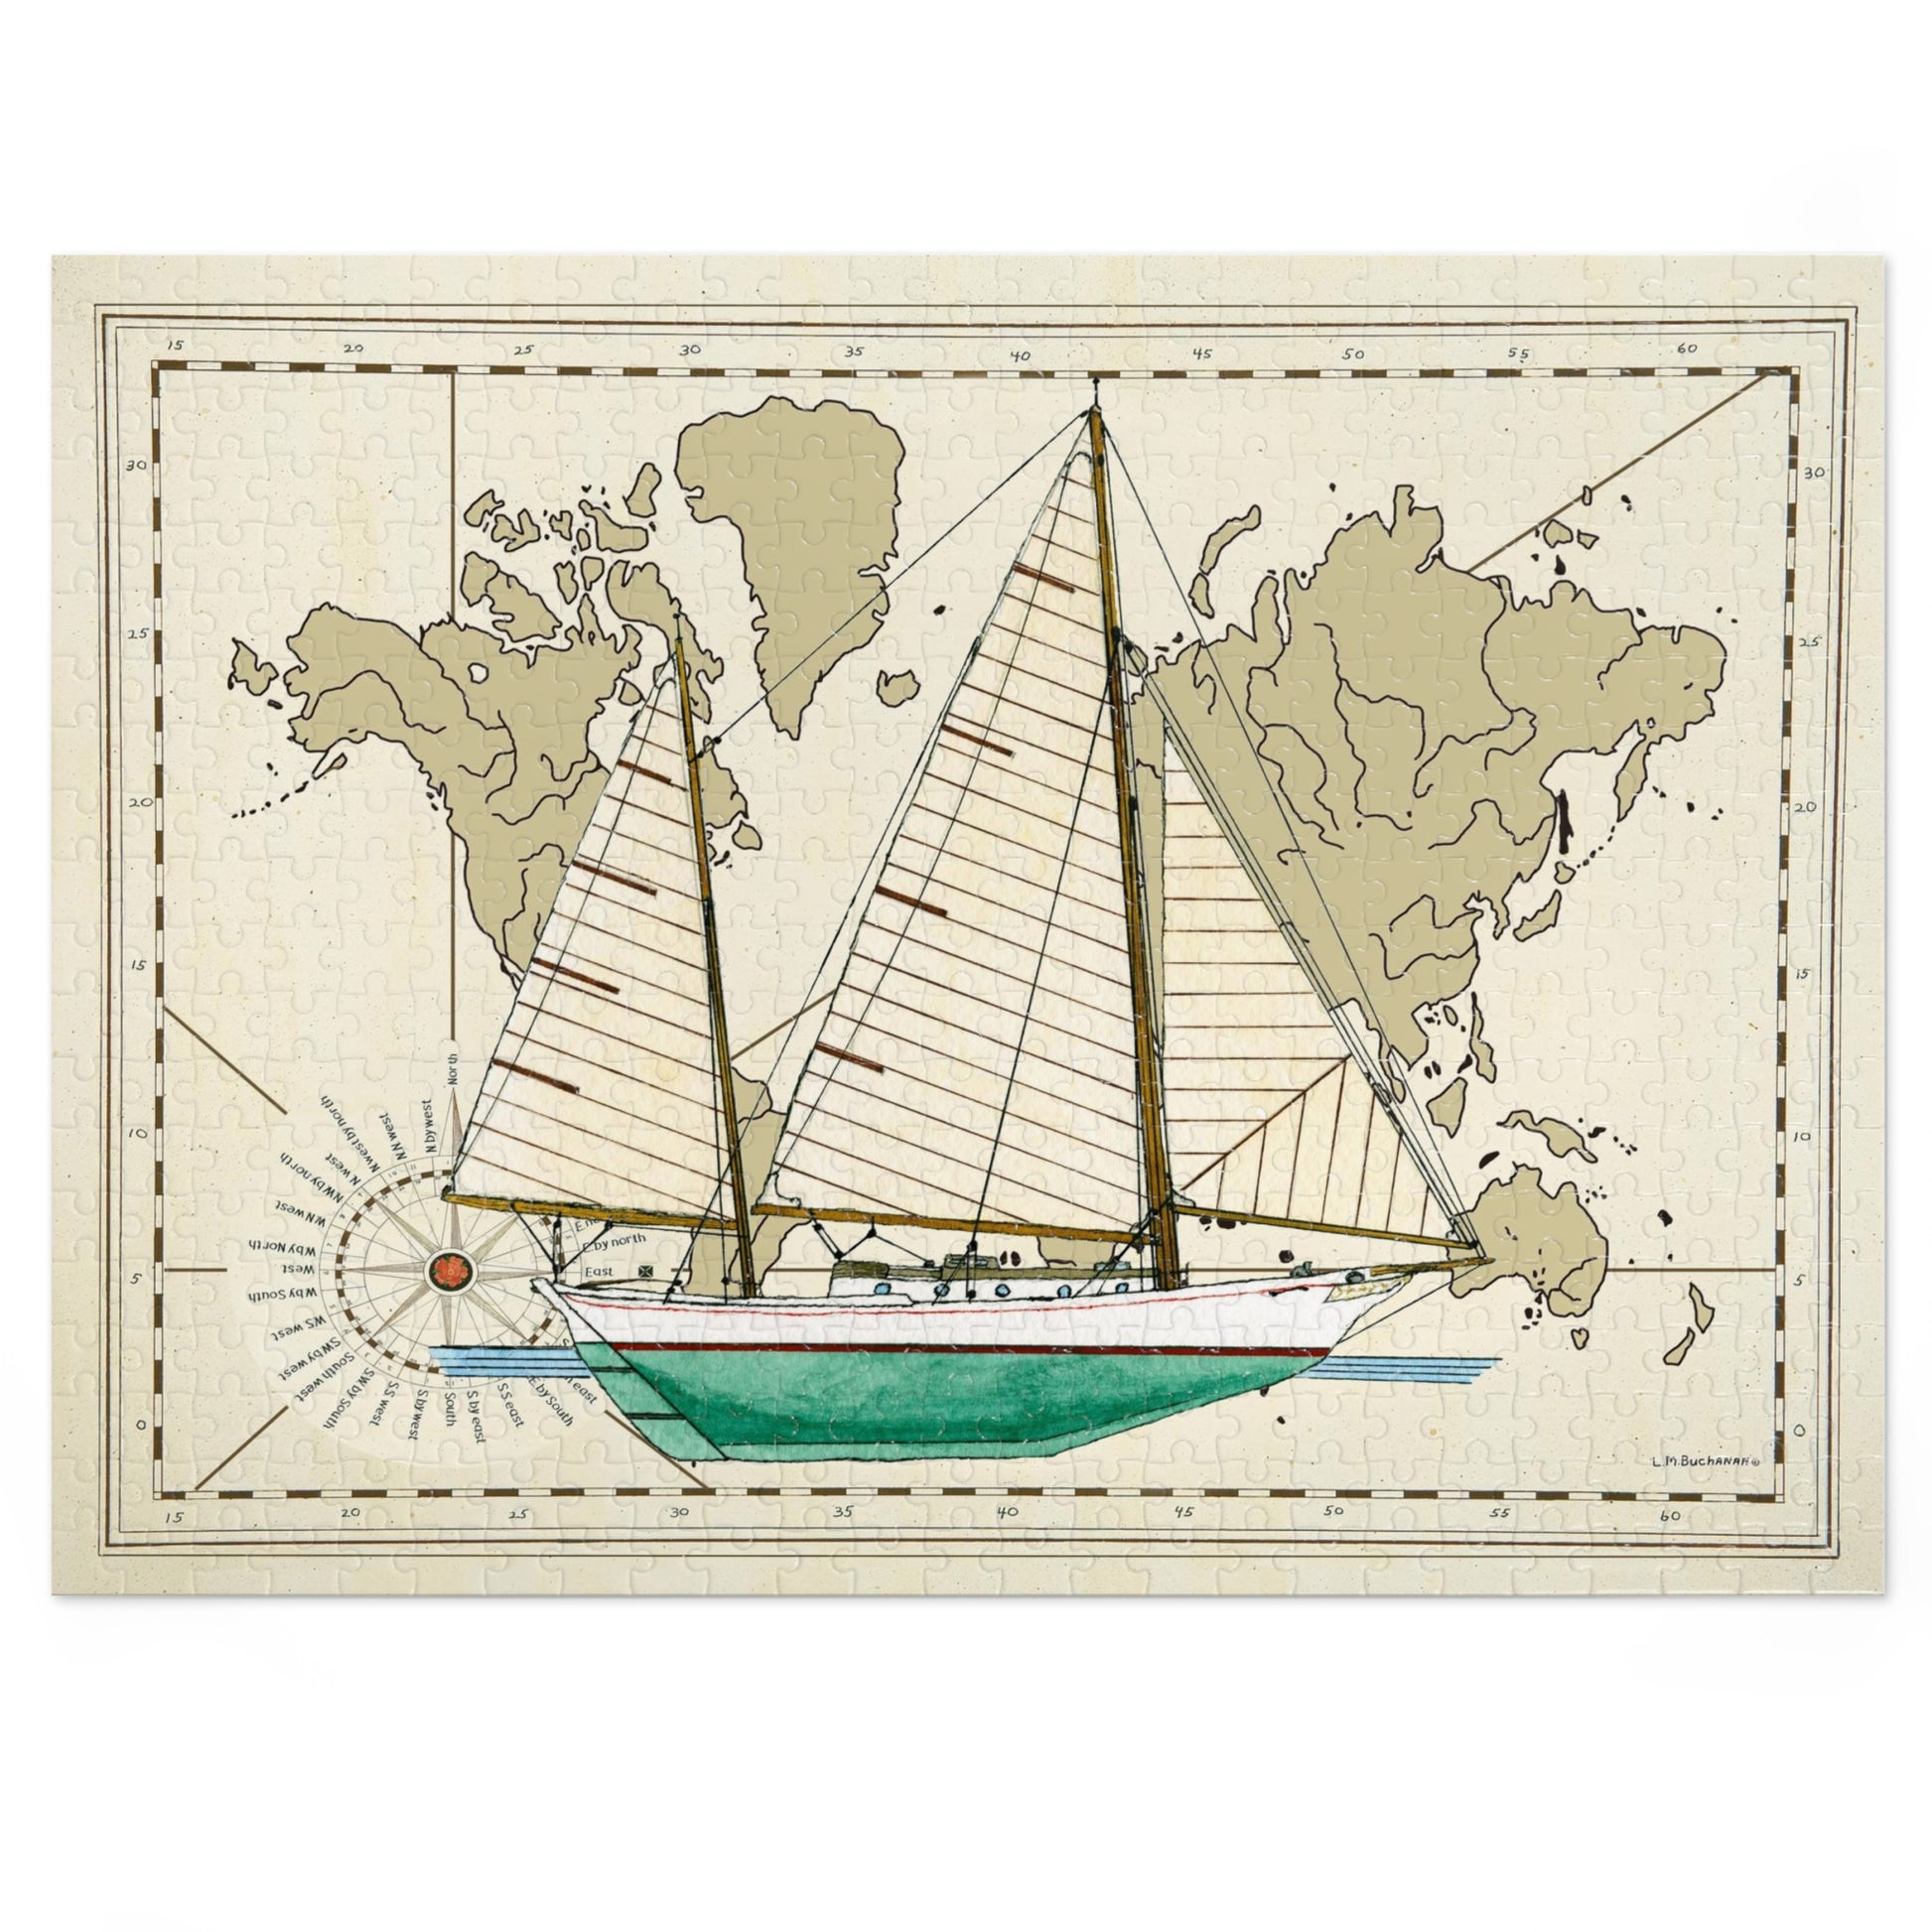 The Radiant Star Clipper Bowed Cruising Ketch has a flat transom, an outboard rudder and clipper bow. Sailing enthusiasts will enjoy using this puzzle with family and fiends. A great gift for your favorite sailor!   The puzzle design features the Radiant Star over a  world map, designed by artist Lee M. Buchanan.